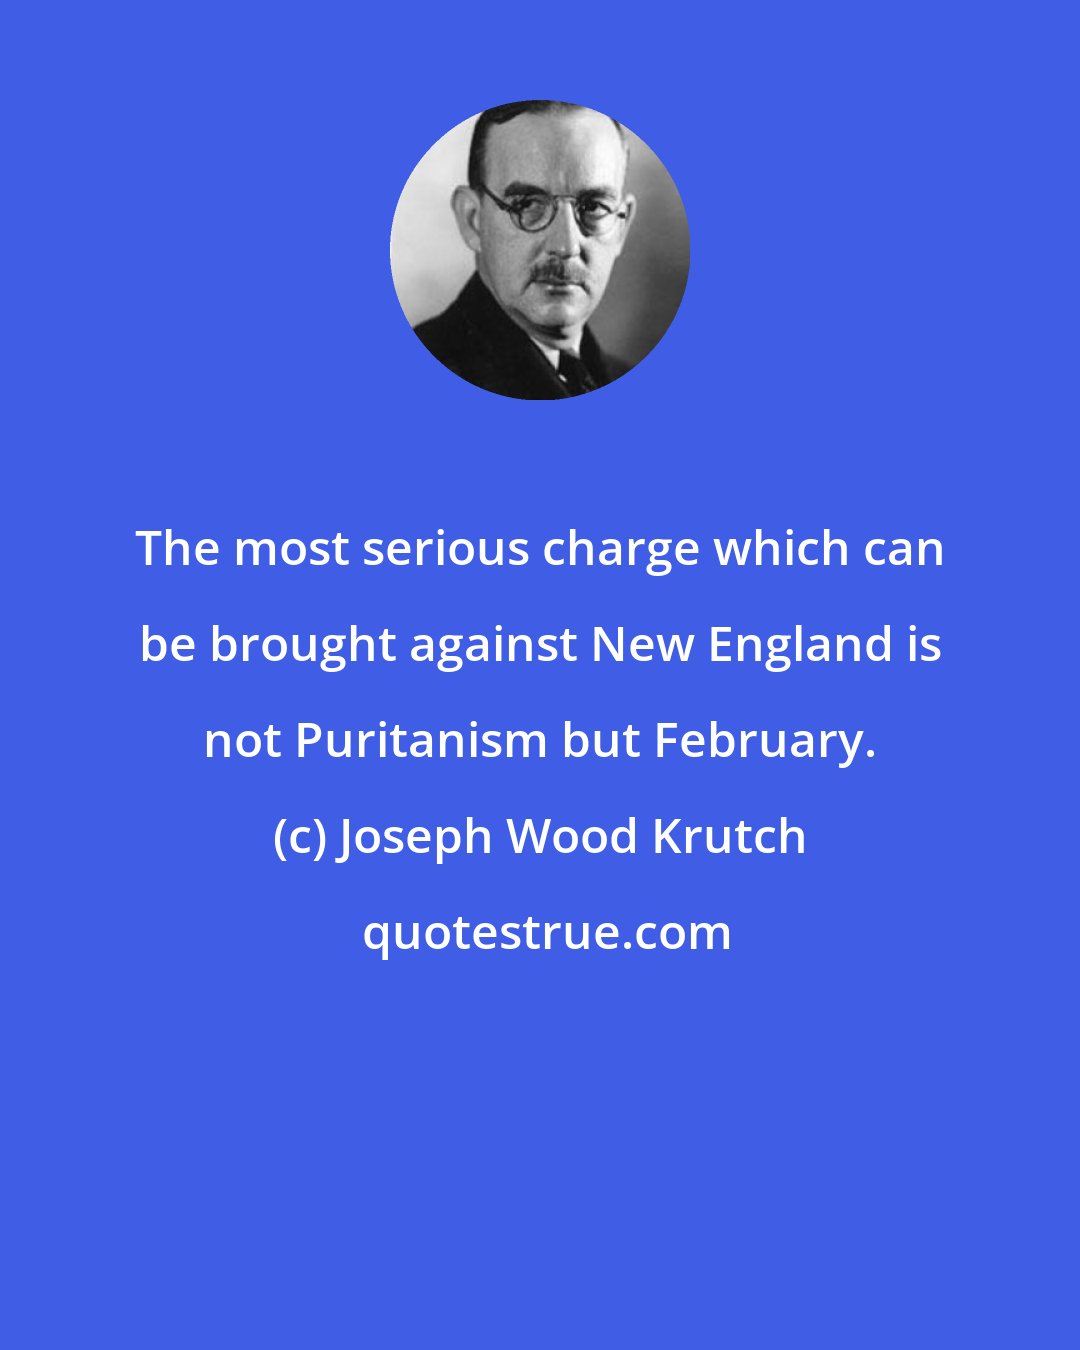 Joseph Wood Krutch: The most serious charge which can be brought against New England is not Puritanism but February.